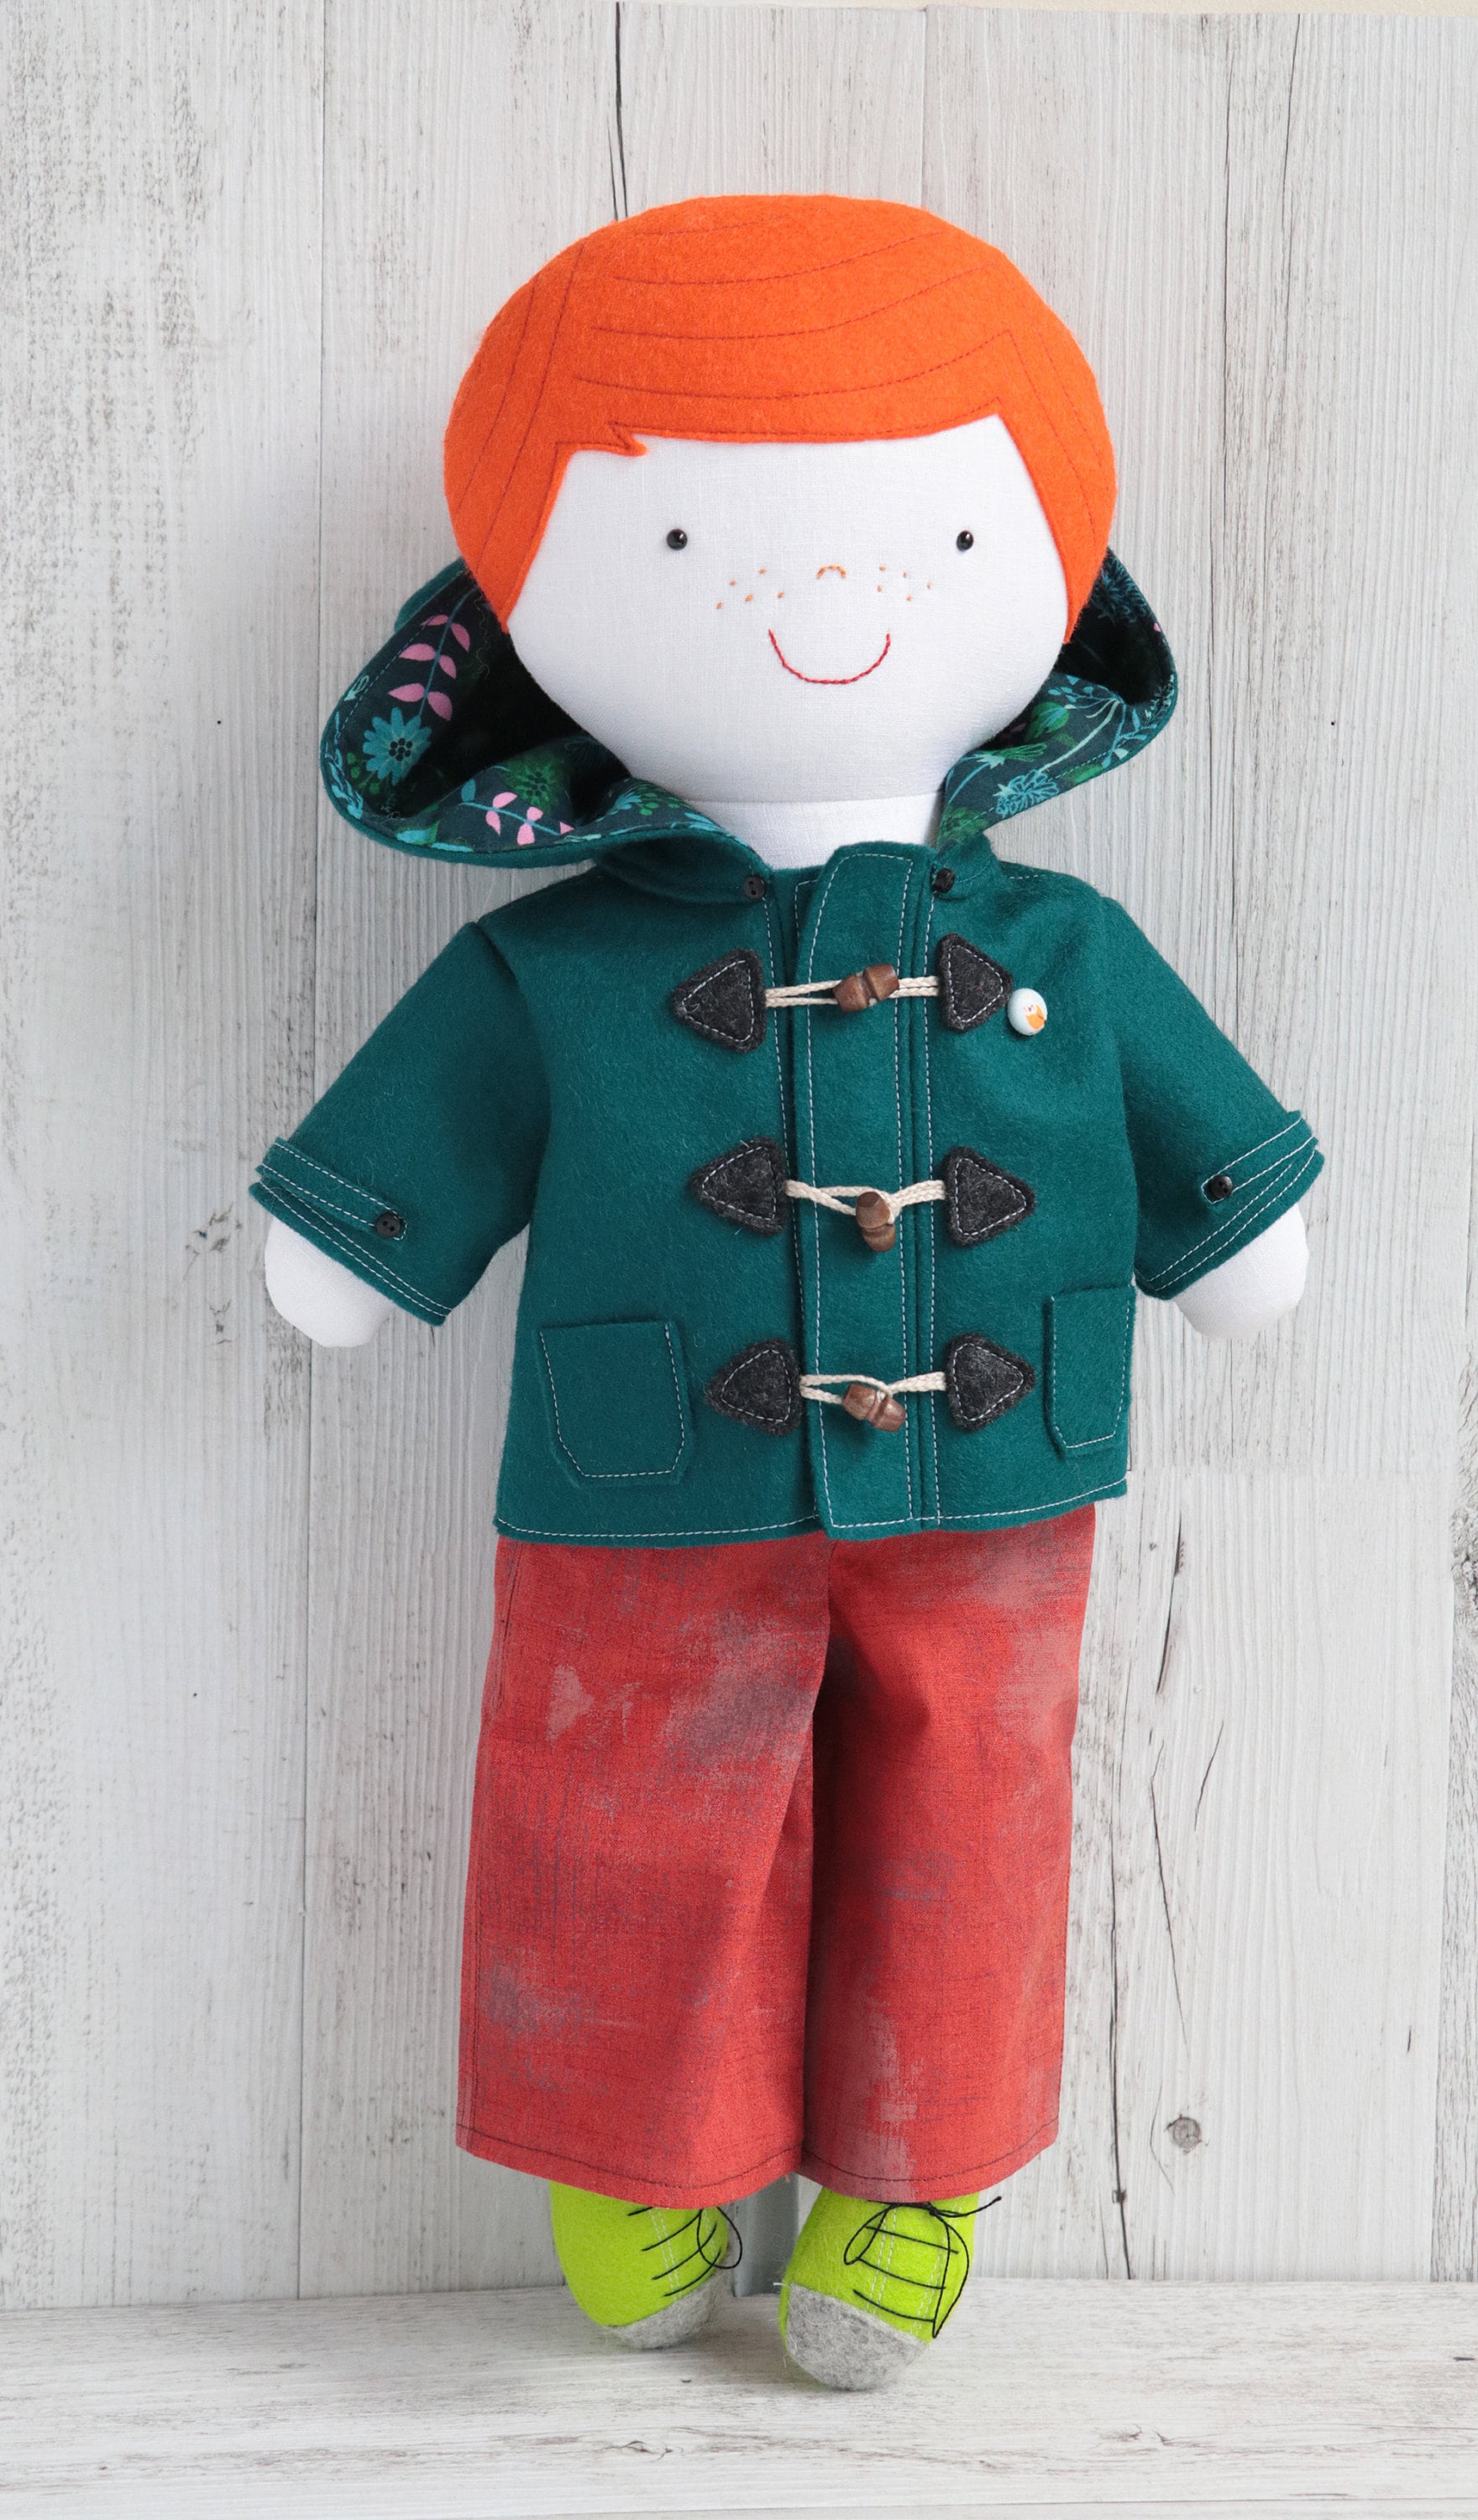 Henry: Boy doll with lots of clothes sewing pattern